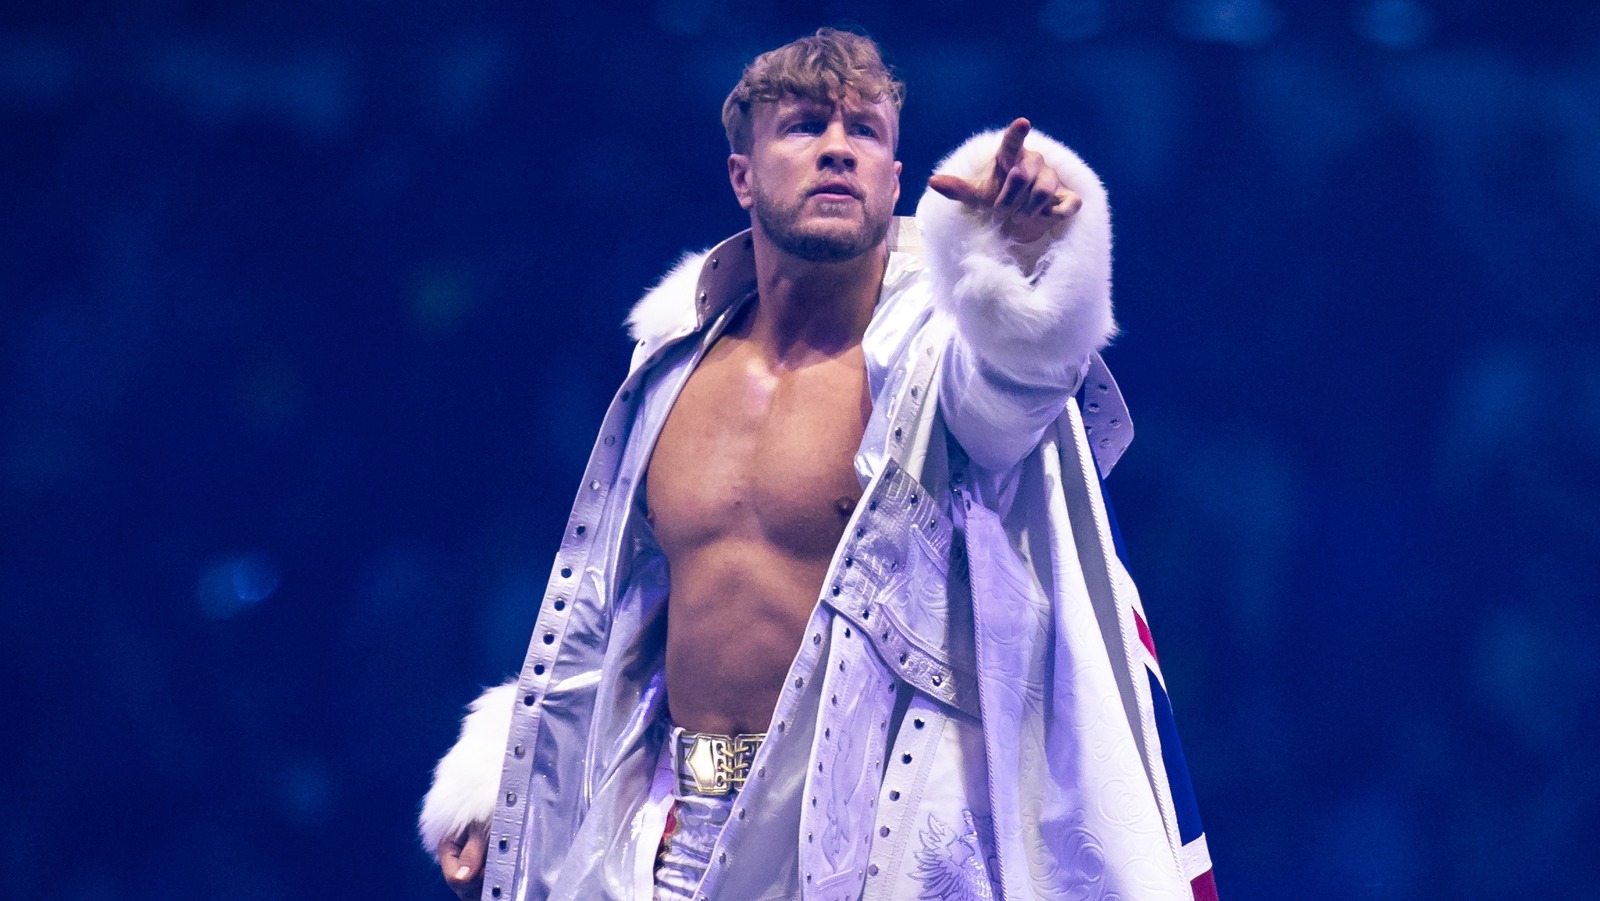 AEW Star Will Ospreay Opens Up About Tribalism In The Pro Wrestling Fandom